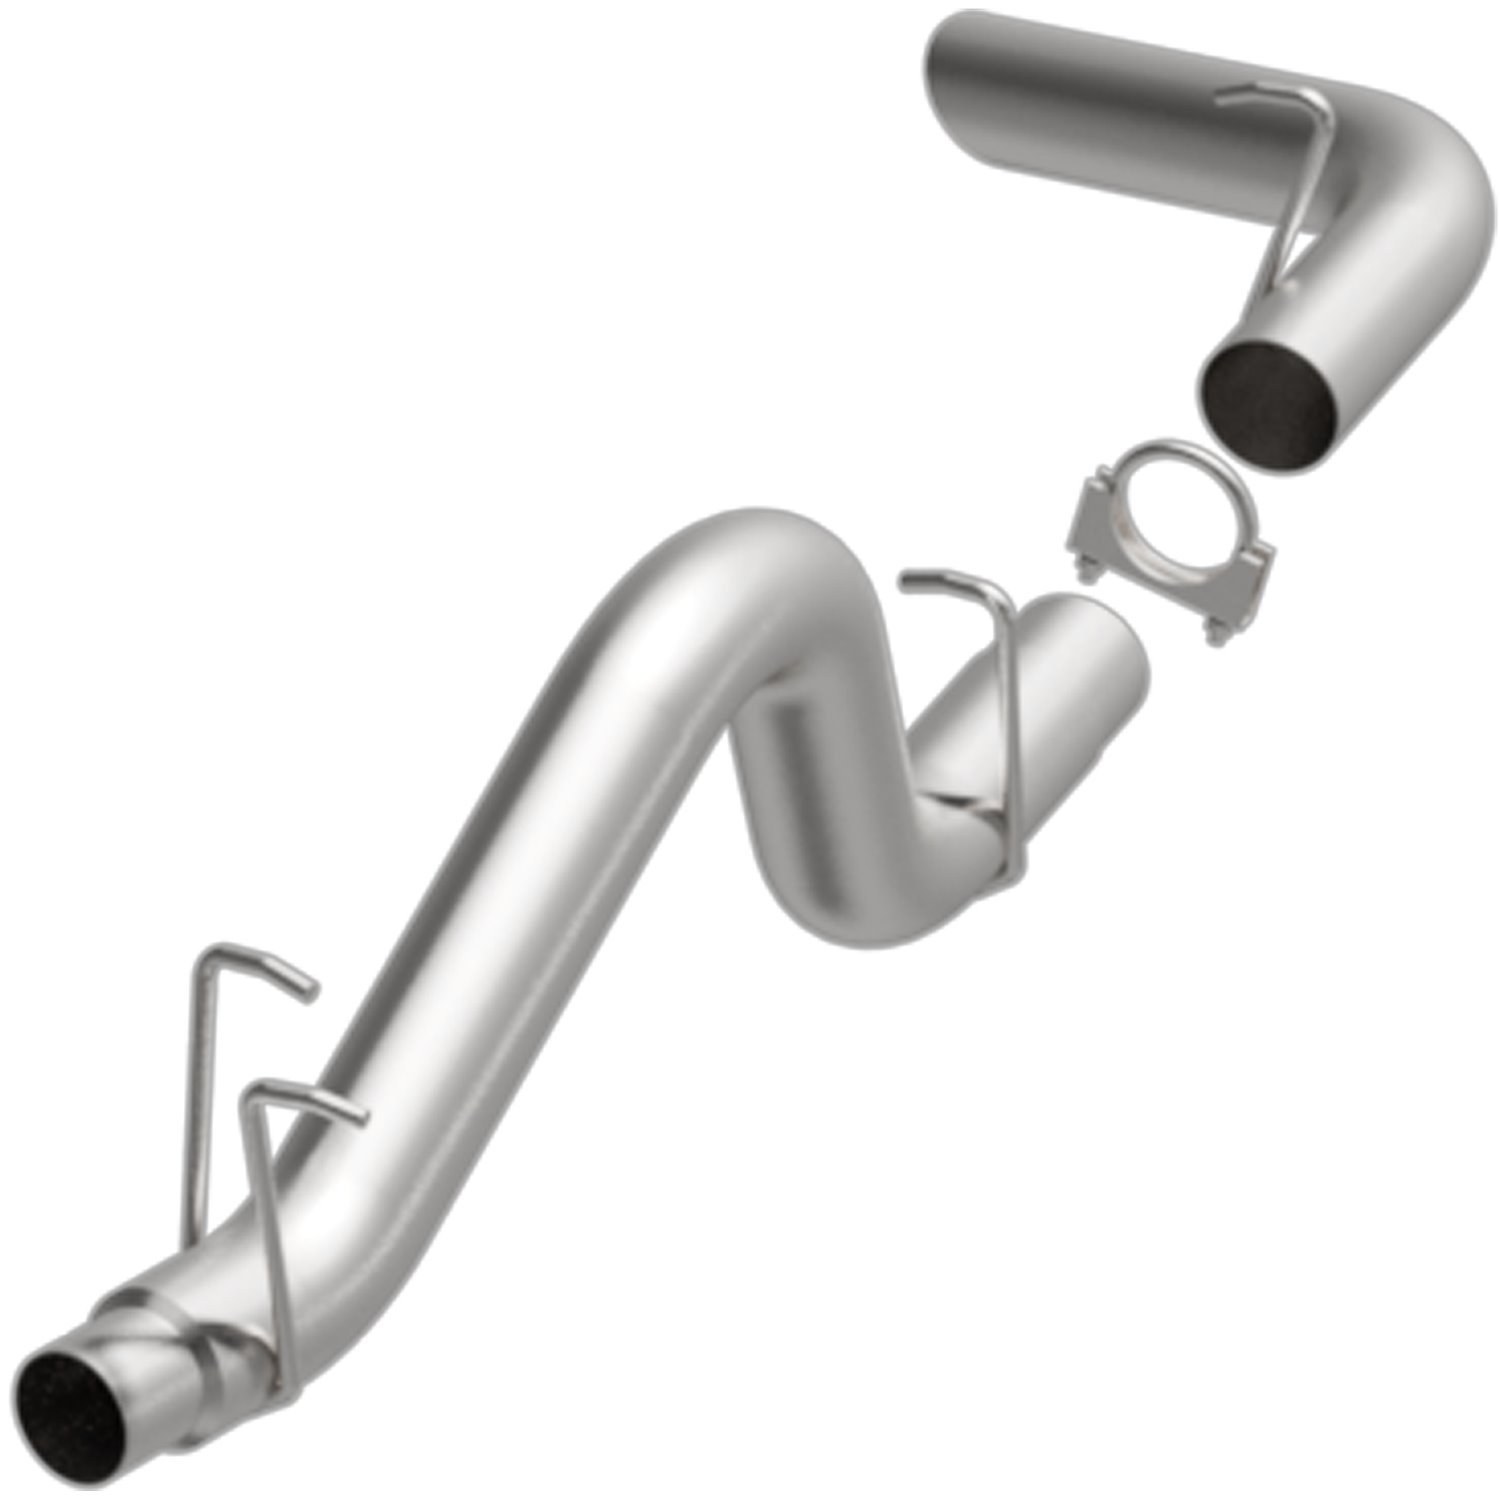 Direct-Fit Exhaust Tail Pipe, 1998-2002 Dodge Ram 1500/2500/3500